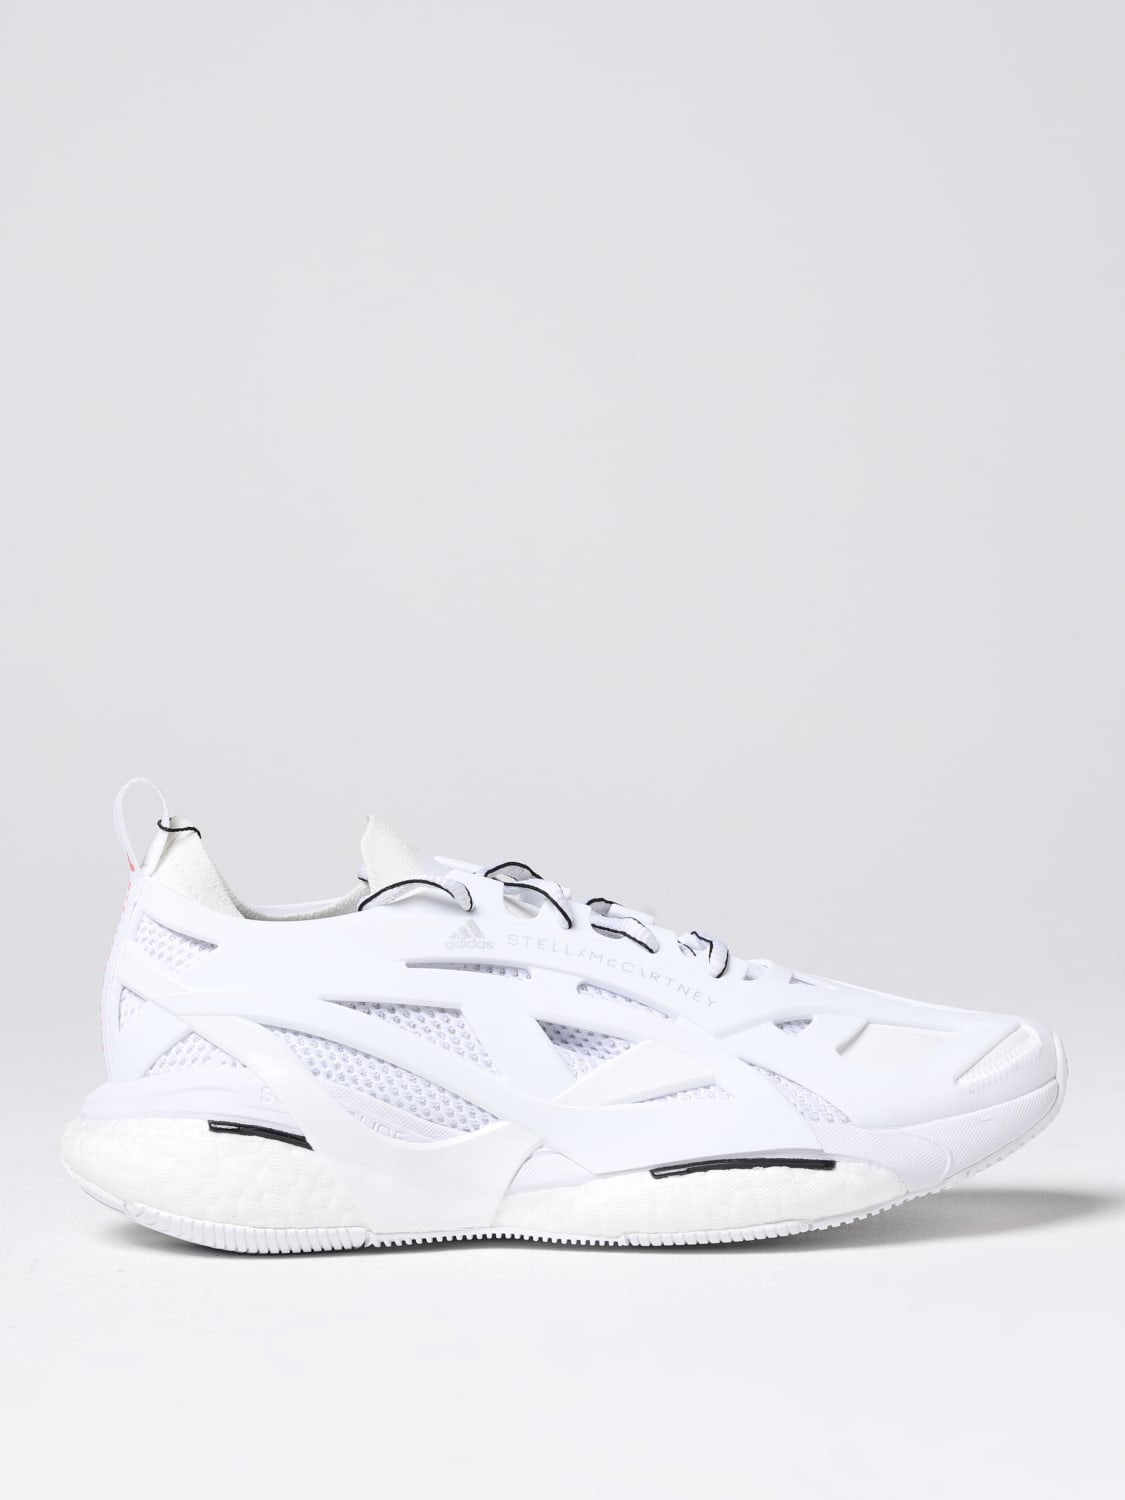 Sneakers aSMC Solarglide Adidas By Stella McCartney in gomma e tessuto stretch